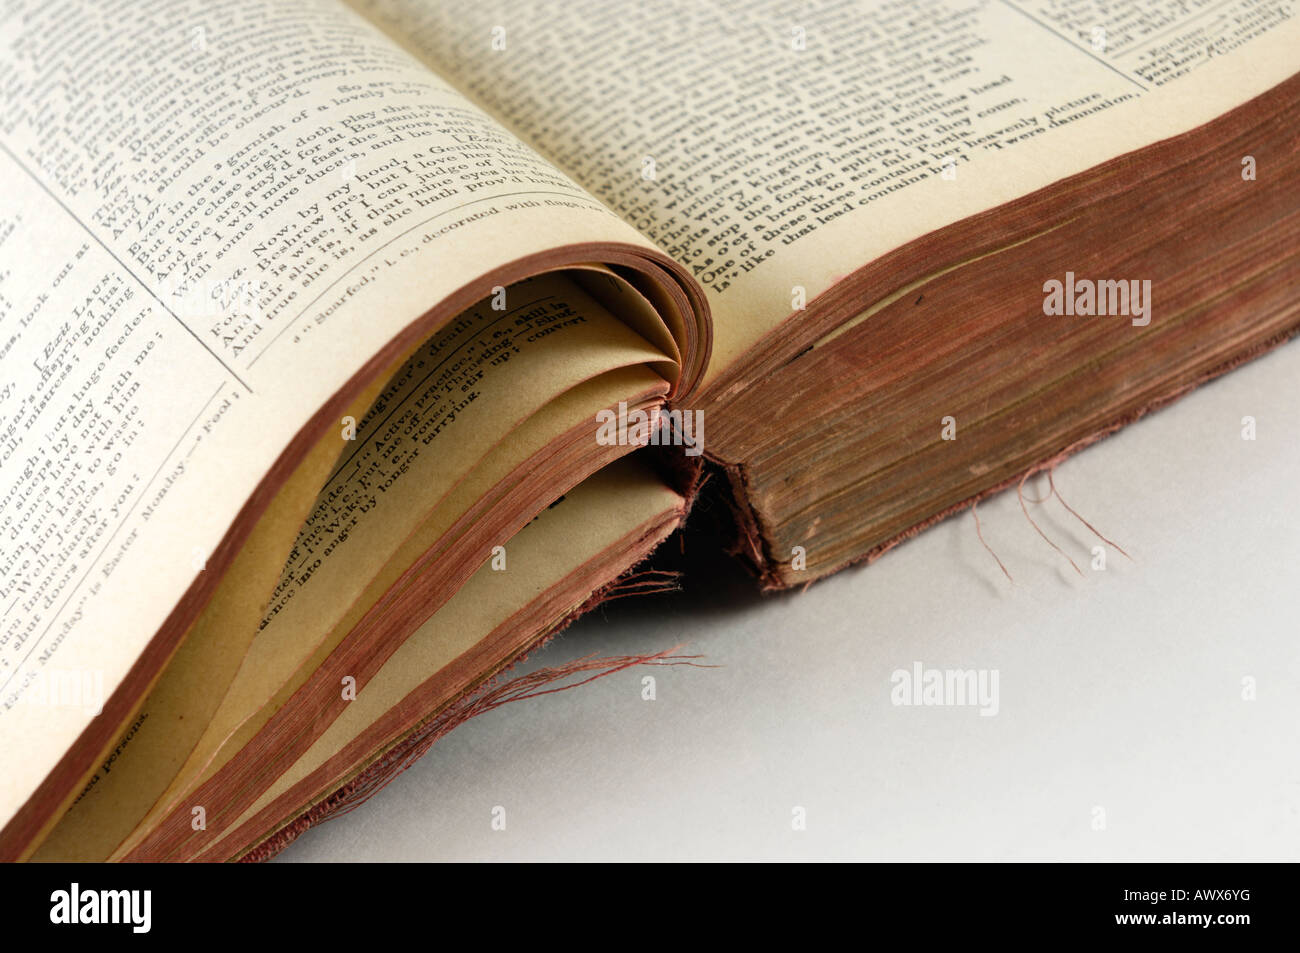 Old open tattered book pages Stock Photo